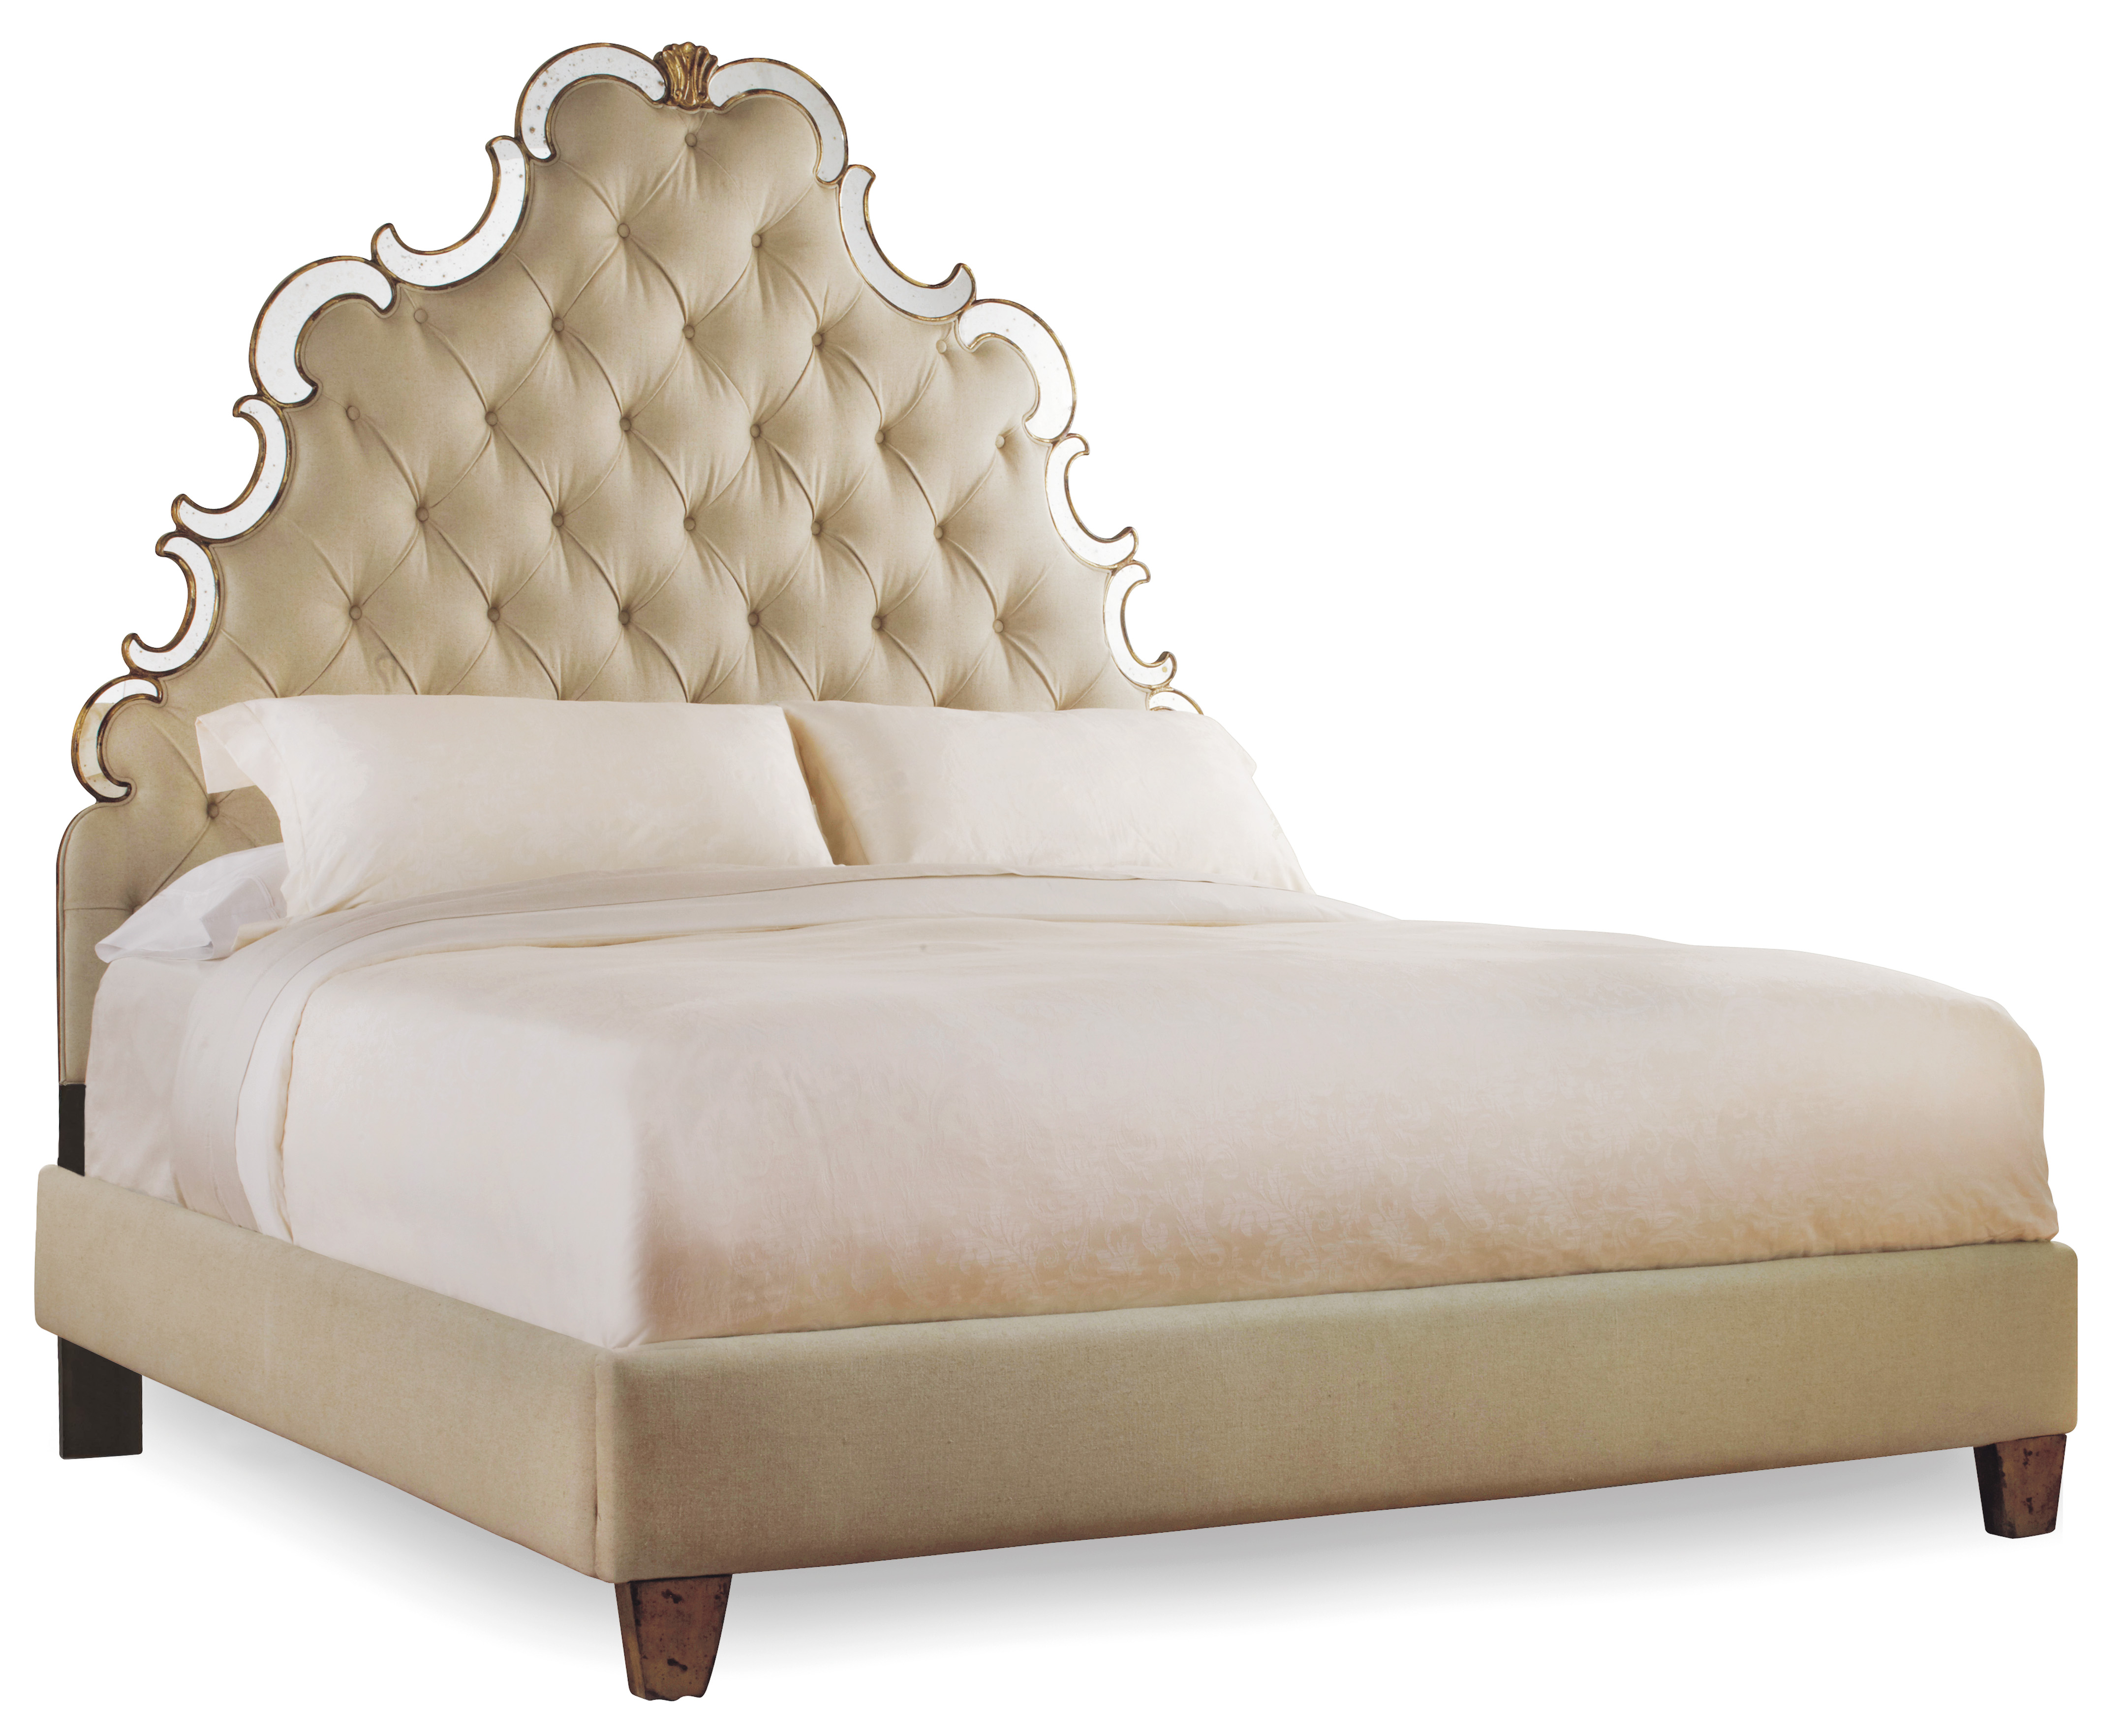 Picture of Tufted Bed Bling 6